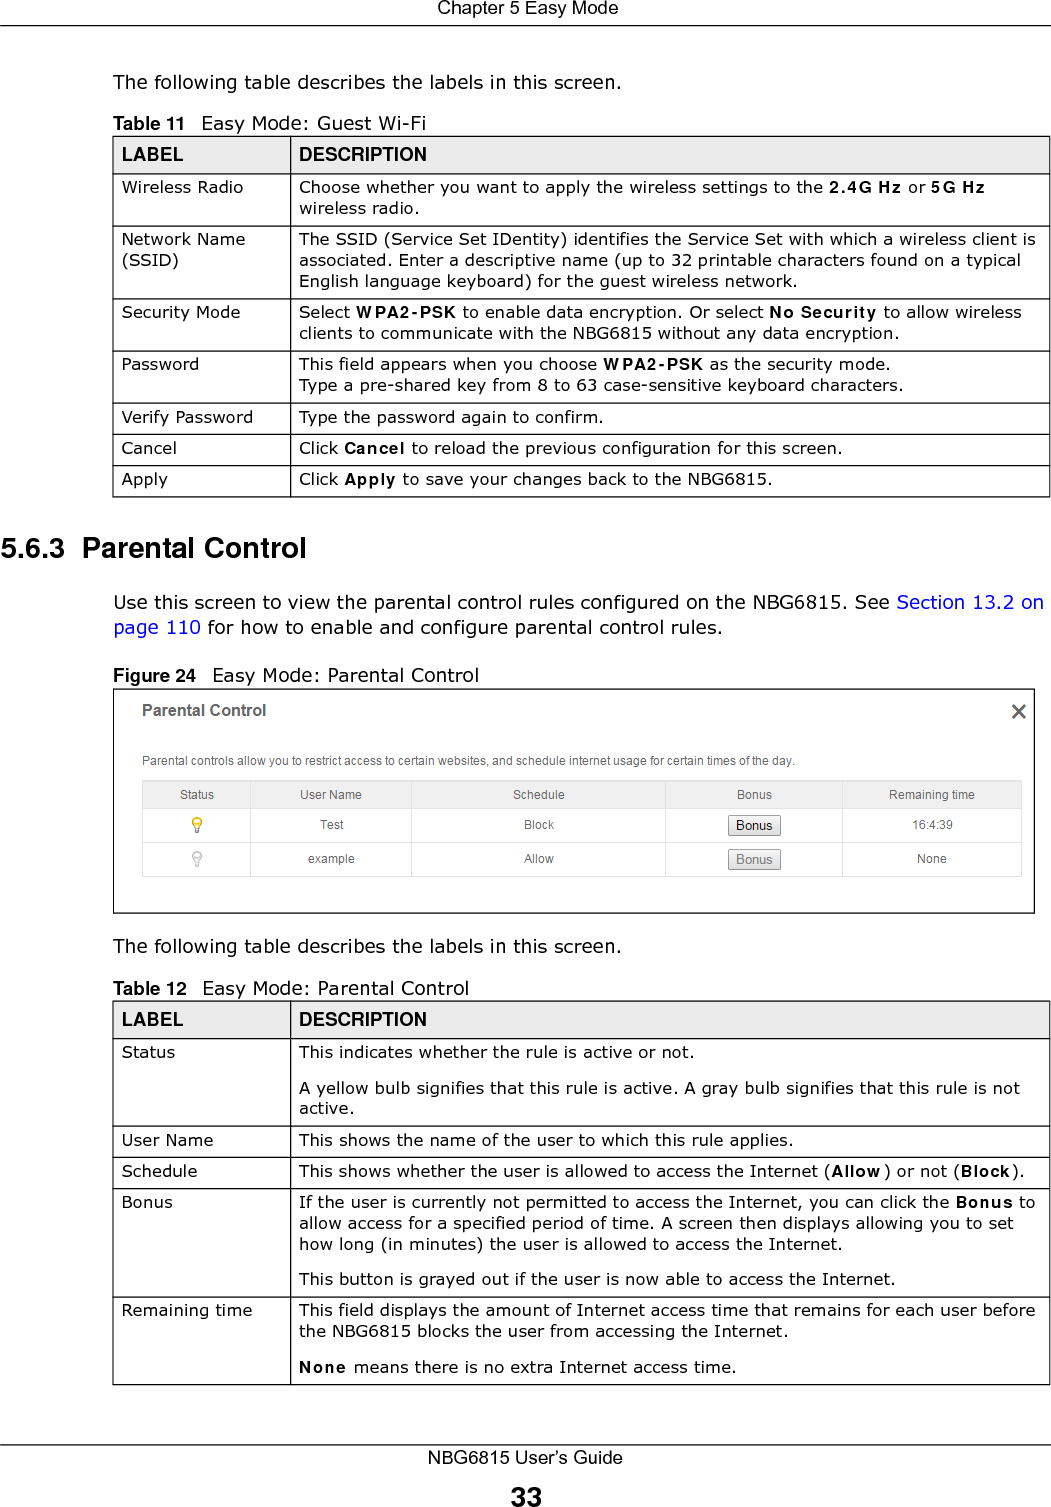  Chapter 5 Easy ModeNBG6815 User’s Guide33The following table describes the labels in this screen.5.6.3  Parental ControlUse this screen to view the parental control rules configured on the NBG6815. See Section 13.2 on page 110 for how to enable and configure parental control rules.Figure 24   Easy Mode: Parental Control The following table describes the labels in this screen.Table 11   Easy Mode: Guest Wi-FiLABEL DESCRIPTIONWireless Radio Choose whether you want to apply the wireless settings to the 2.4G Hz or 5G Hz wireless radio.Network Name (SSID)The SSID (Service Set IDentity) identifies the Service Set with which a wireless client is associated. Enter a descriptive name (up to 32 printable characters found on a typical English language keyboard) for the guest wireless network. Security Mode  Select WPA2-PSK to enable data encryption. Or select No Security to allow wireless clients to communicate with the NBG6815 without any data encryption.Password  This field appears when you choose WPA2-PSK as the security mode.Type a pre-shared key from 8 to 63 case-sensitive keyboard characters.Verify Password Type the password again to confirm.Cancel  Click Cancel to reload the previous configuration for this screen.Apply Click Apply to save your changes back to the NBG6815.Table 12   Easy Mode: Parental ControlLABEL DESCRIPTIONStatus This indicates whether the rule is active or not.A yellow bulb signifies that this rule is active. A gray bulb signifies that this rule is not active.User Name This shows the name of the user to which this rule applies.Schedule This shows whether the user is allowed to access the Internet (Allow) or not (Block). Bonus If the user is currently not permitted to access the Internet, you can click the Bonus to allow access for a specified period of time. A screen then displays allowing you to set how long (in minutes) the user is allowed to access the Internet.This button is grayed out if the user is now able to access the Internet.Remaining time  This field displays the amount of Internet access time that remains for each user before the NBG6815 blocks the user from accessing the Internet.None means there is no extra Internet access time. 